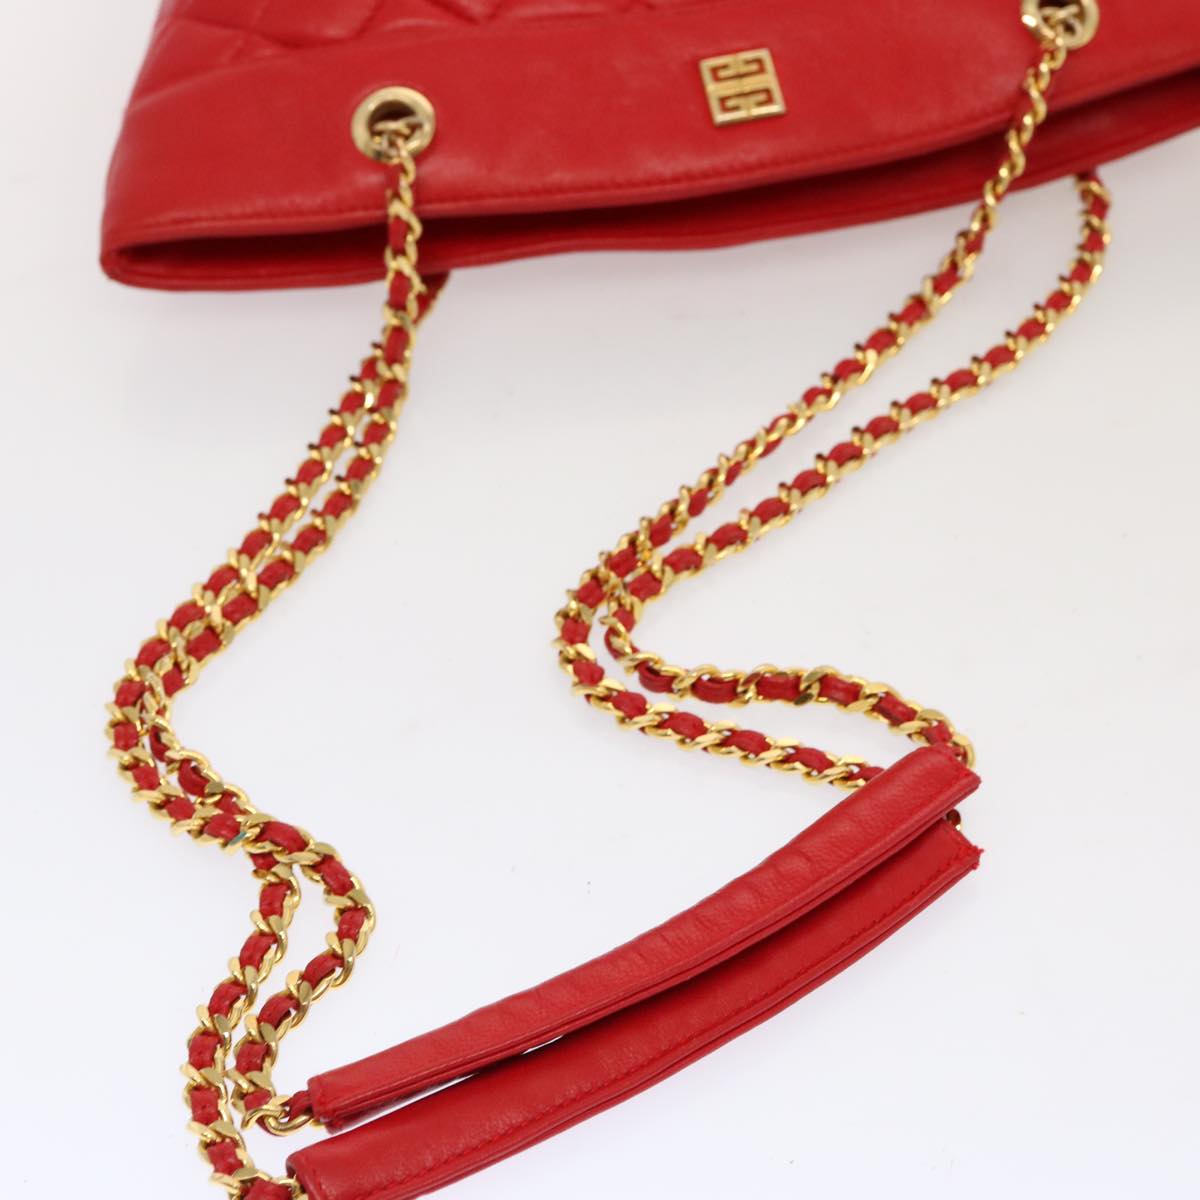 GIVENCHY Quilted Chain Shoulder Bag Leather Red Auth yk11347